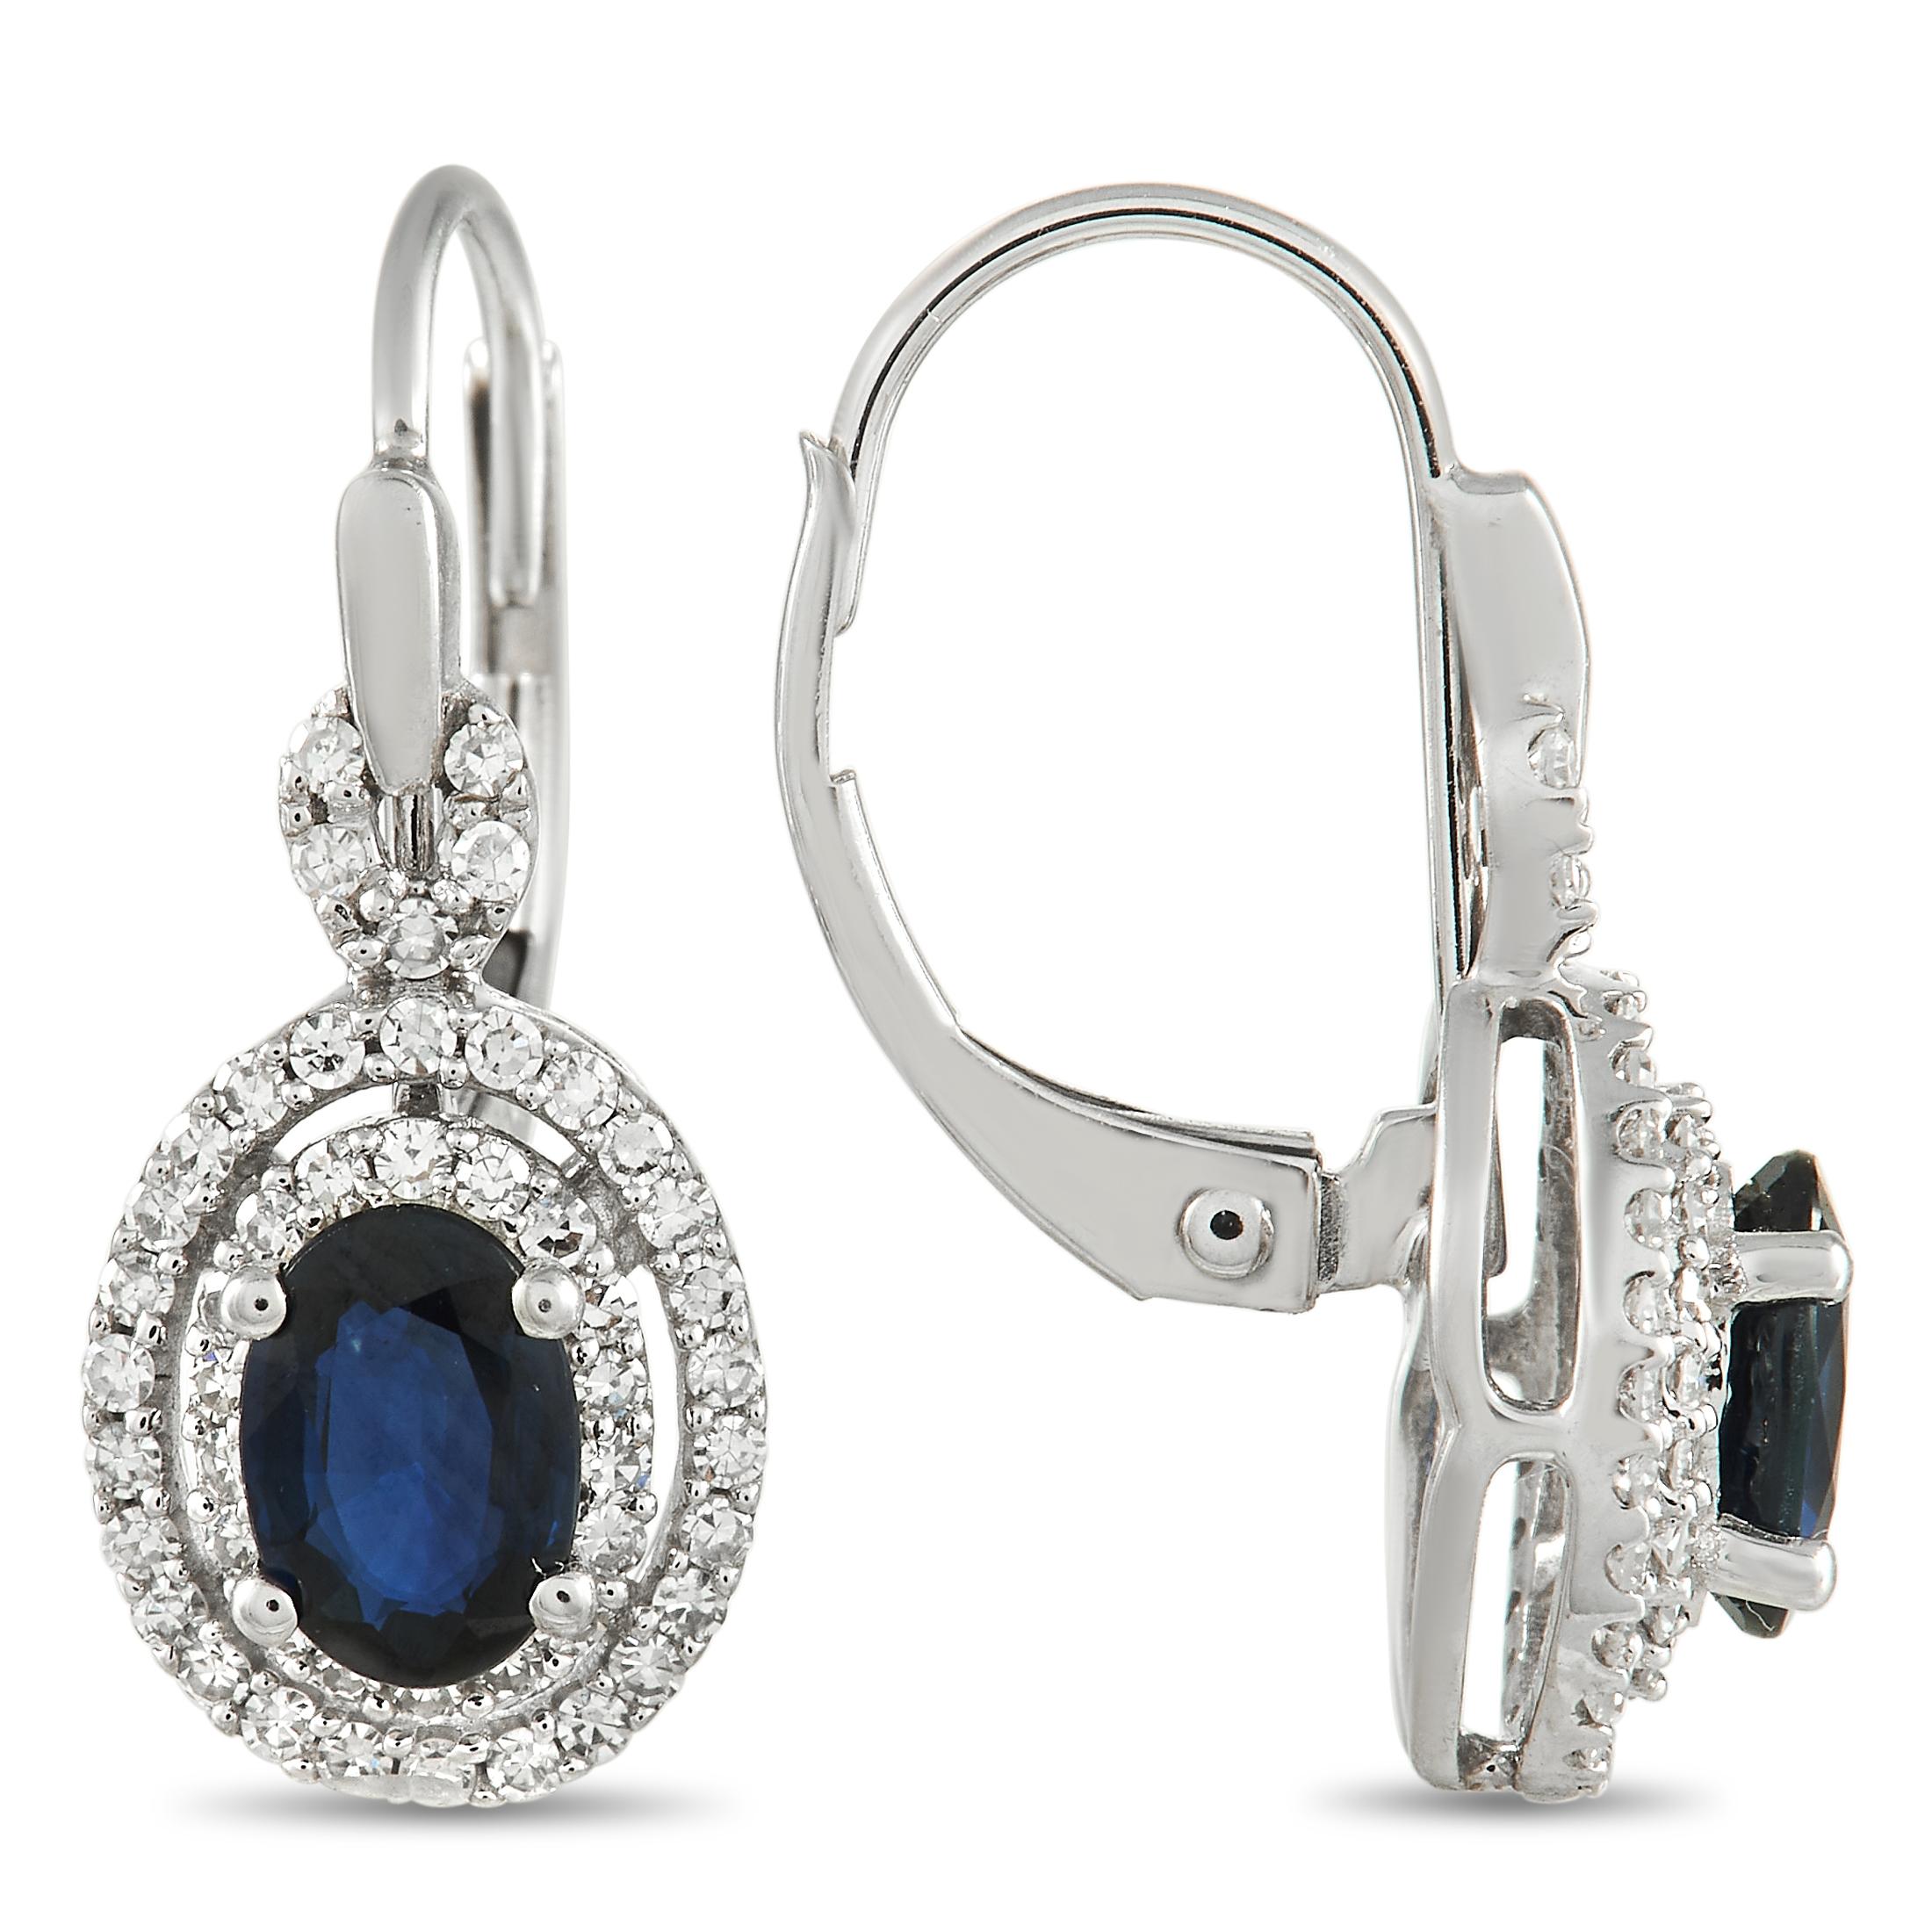 Crafted with a sleek 14K White Gold setting, these exquisite earrings are poised to continually take your breath away. At the center of a double halo of diamonds, oval-cut sapphire gemstones add a touch of extra elegance. These earrings measure